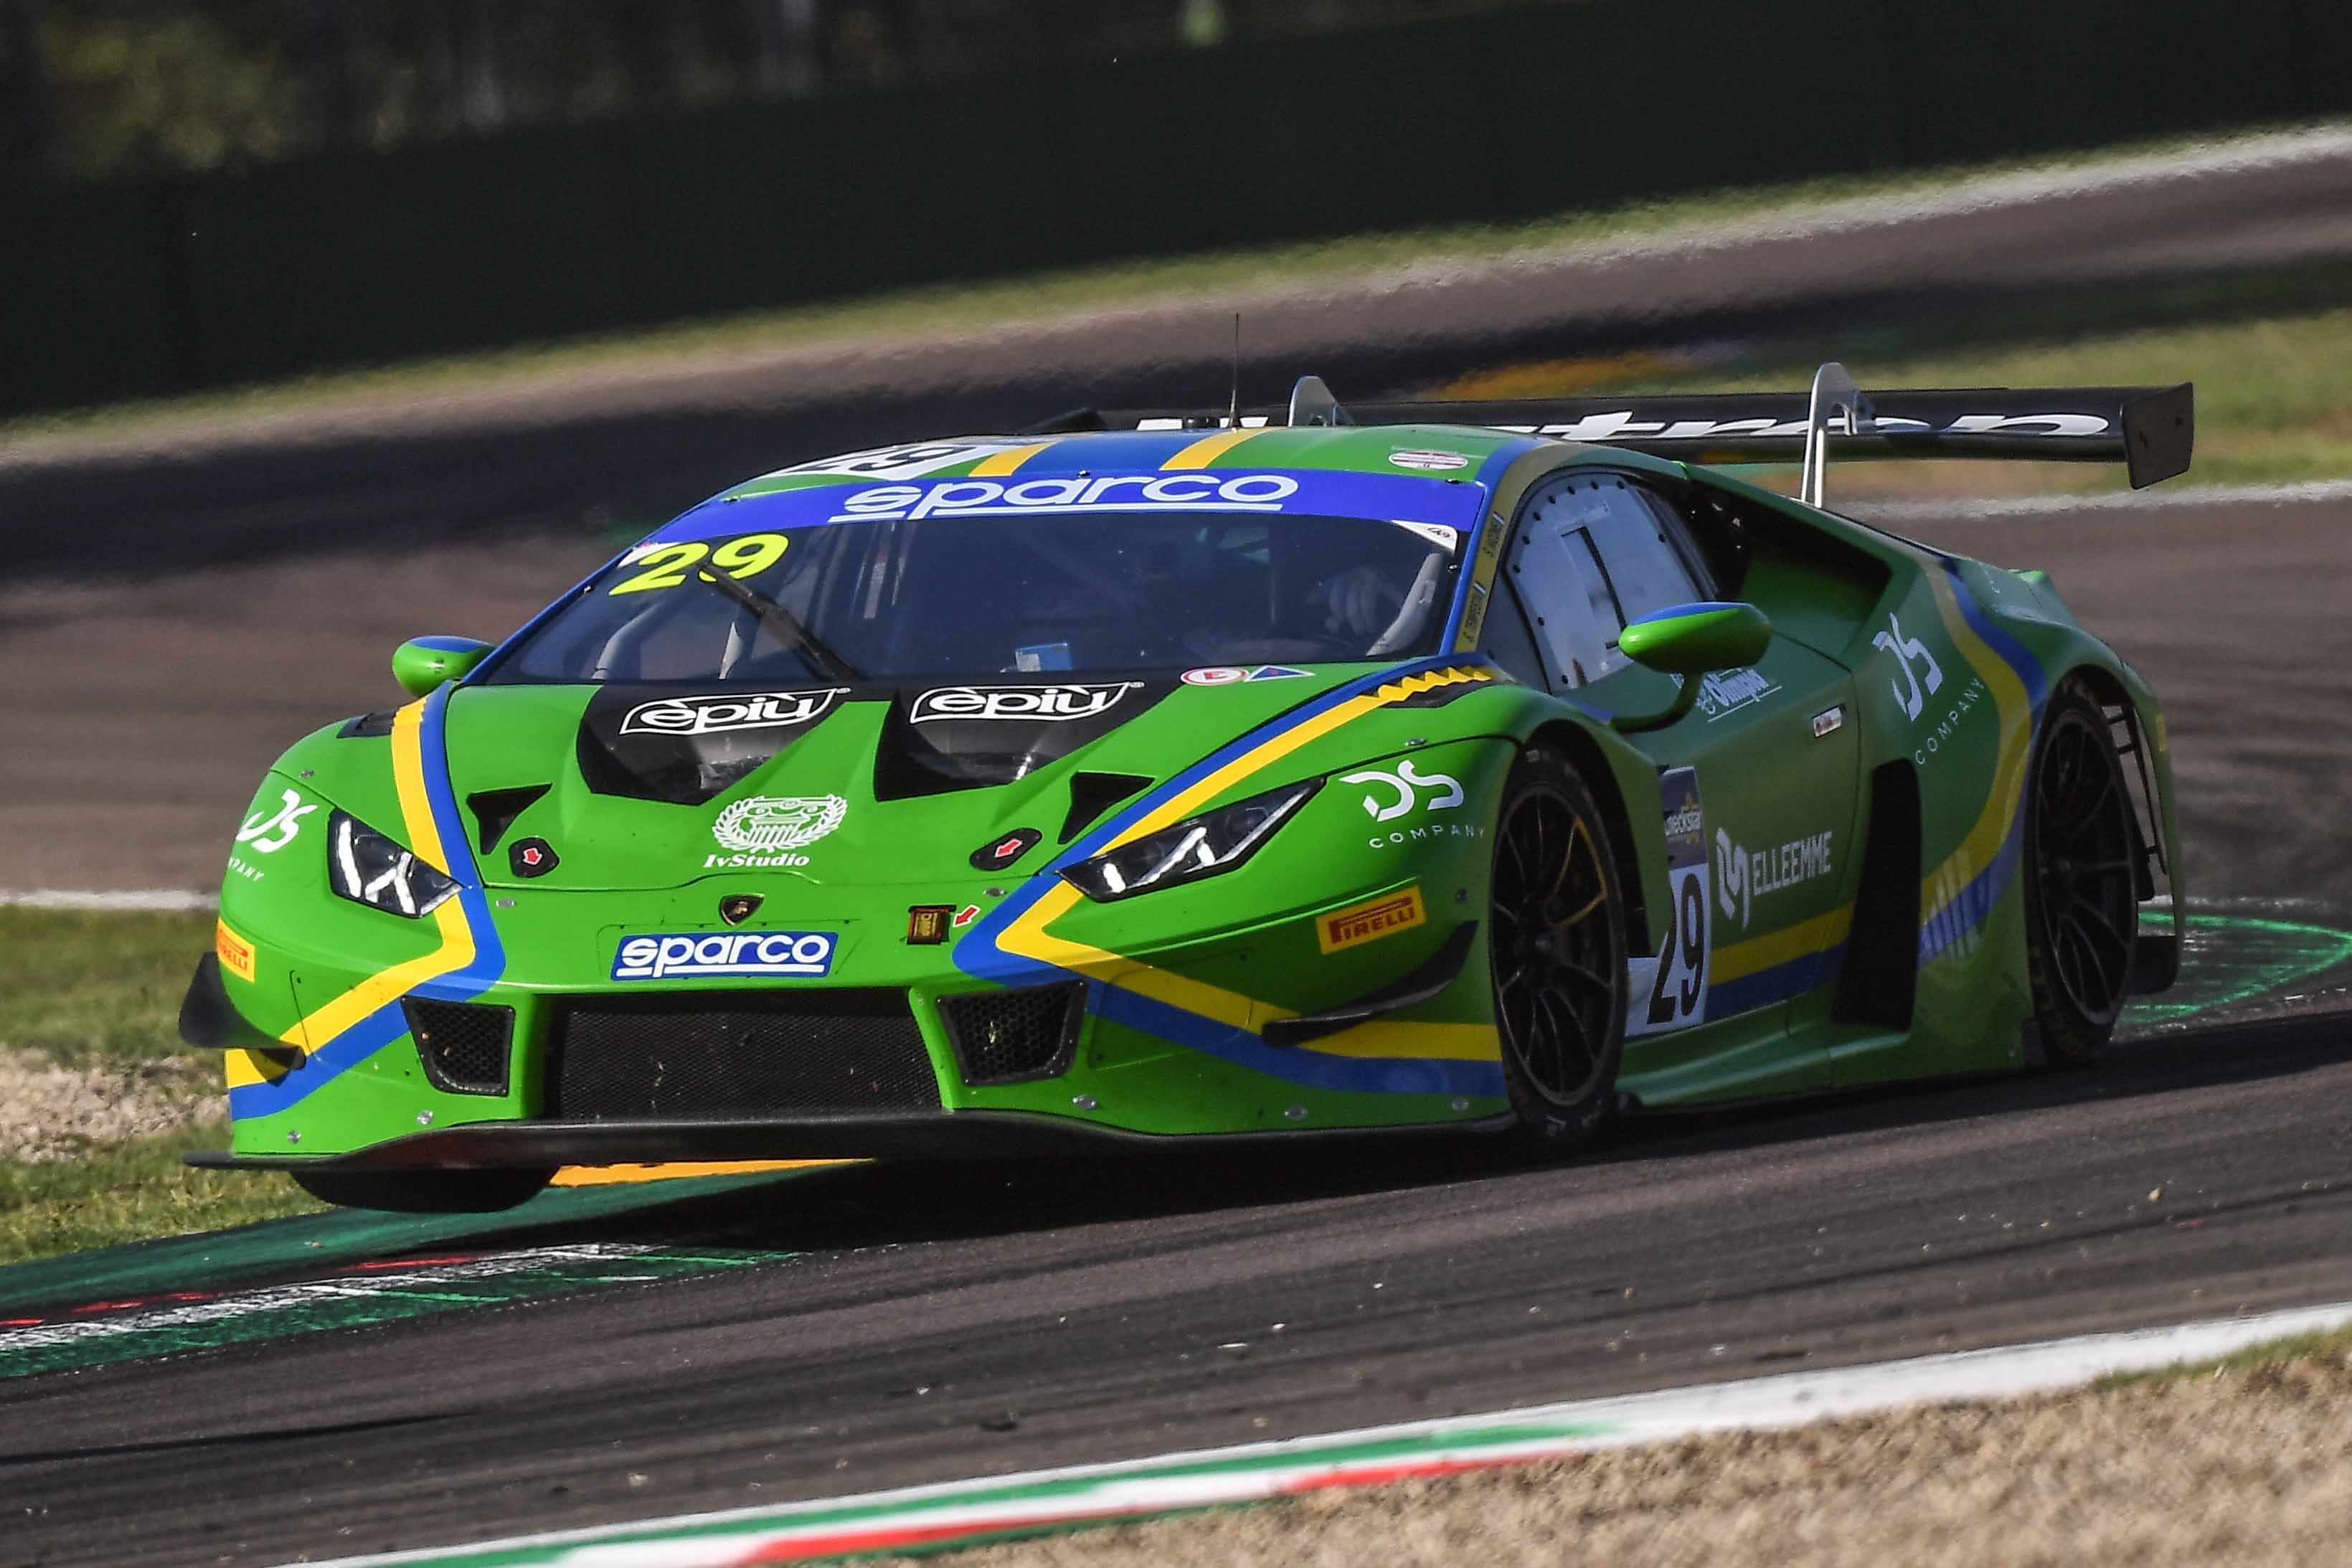 DOUBLE PODIUM FOR IACONE AND TEMPESTA AT IMOLA